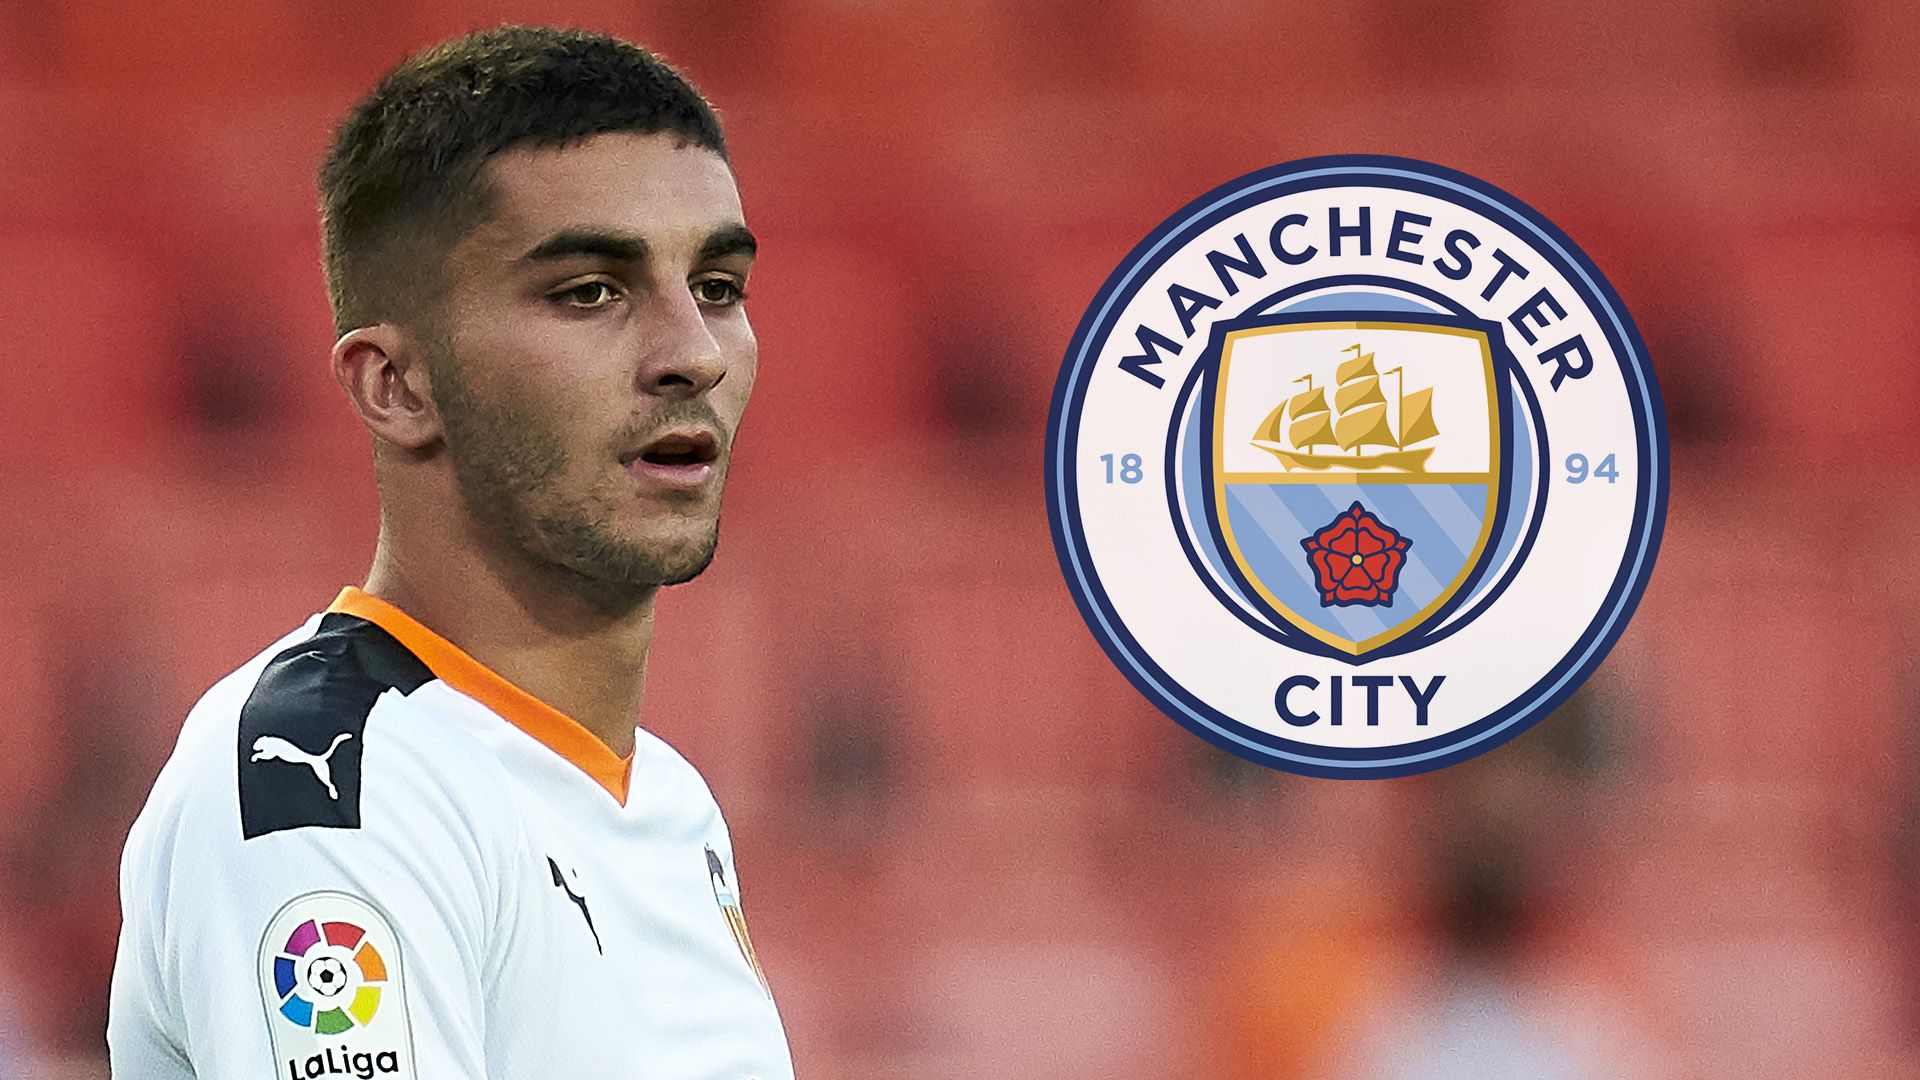 For sale Valencia to Manchester City, Ferran Torres is furious